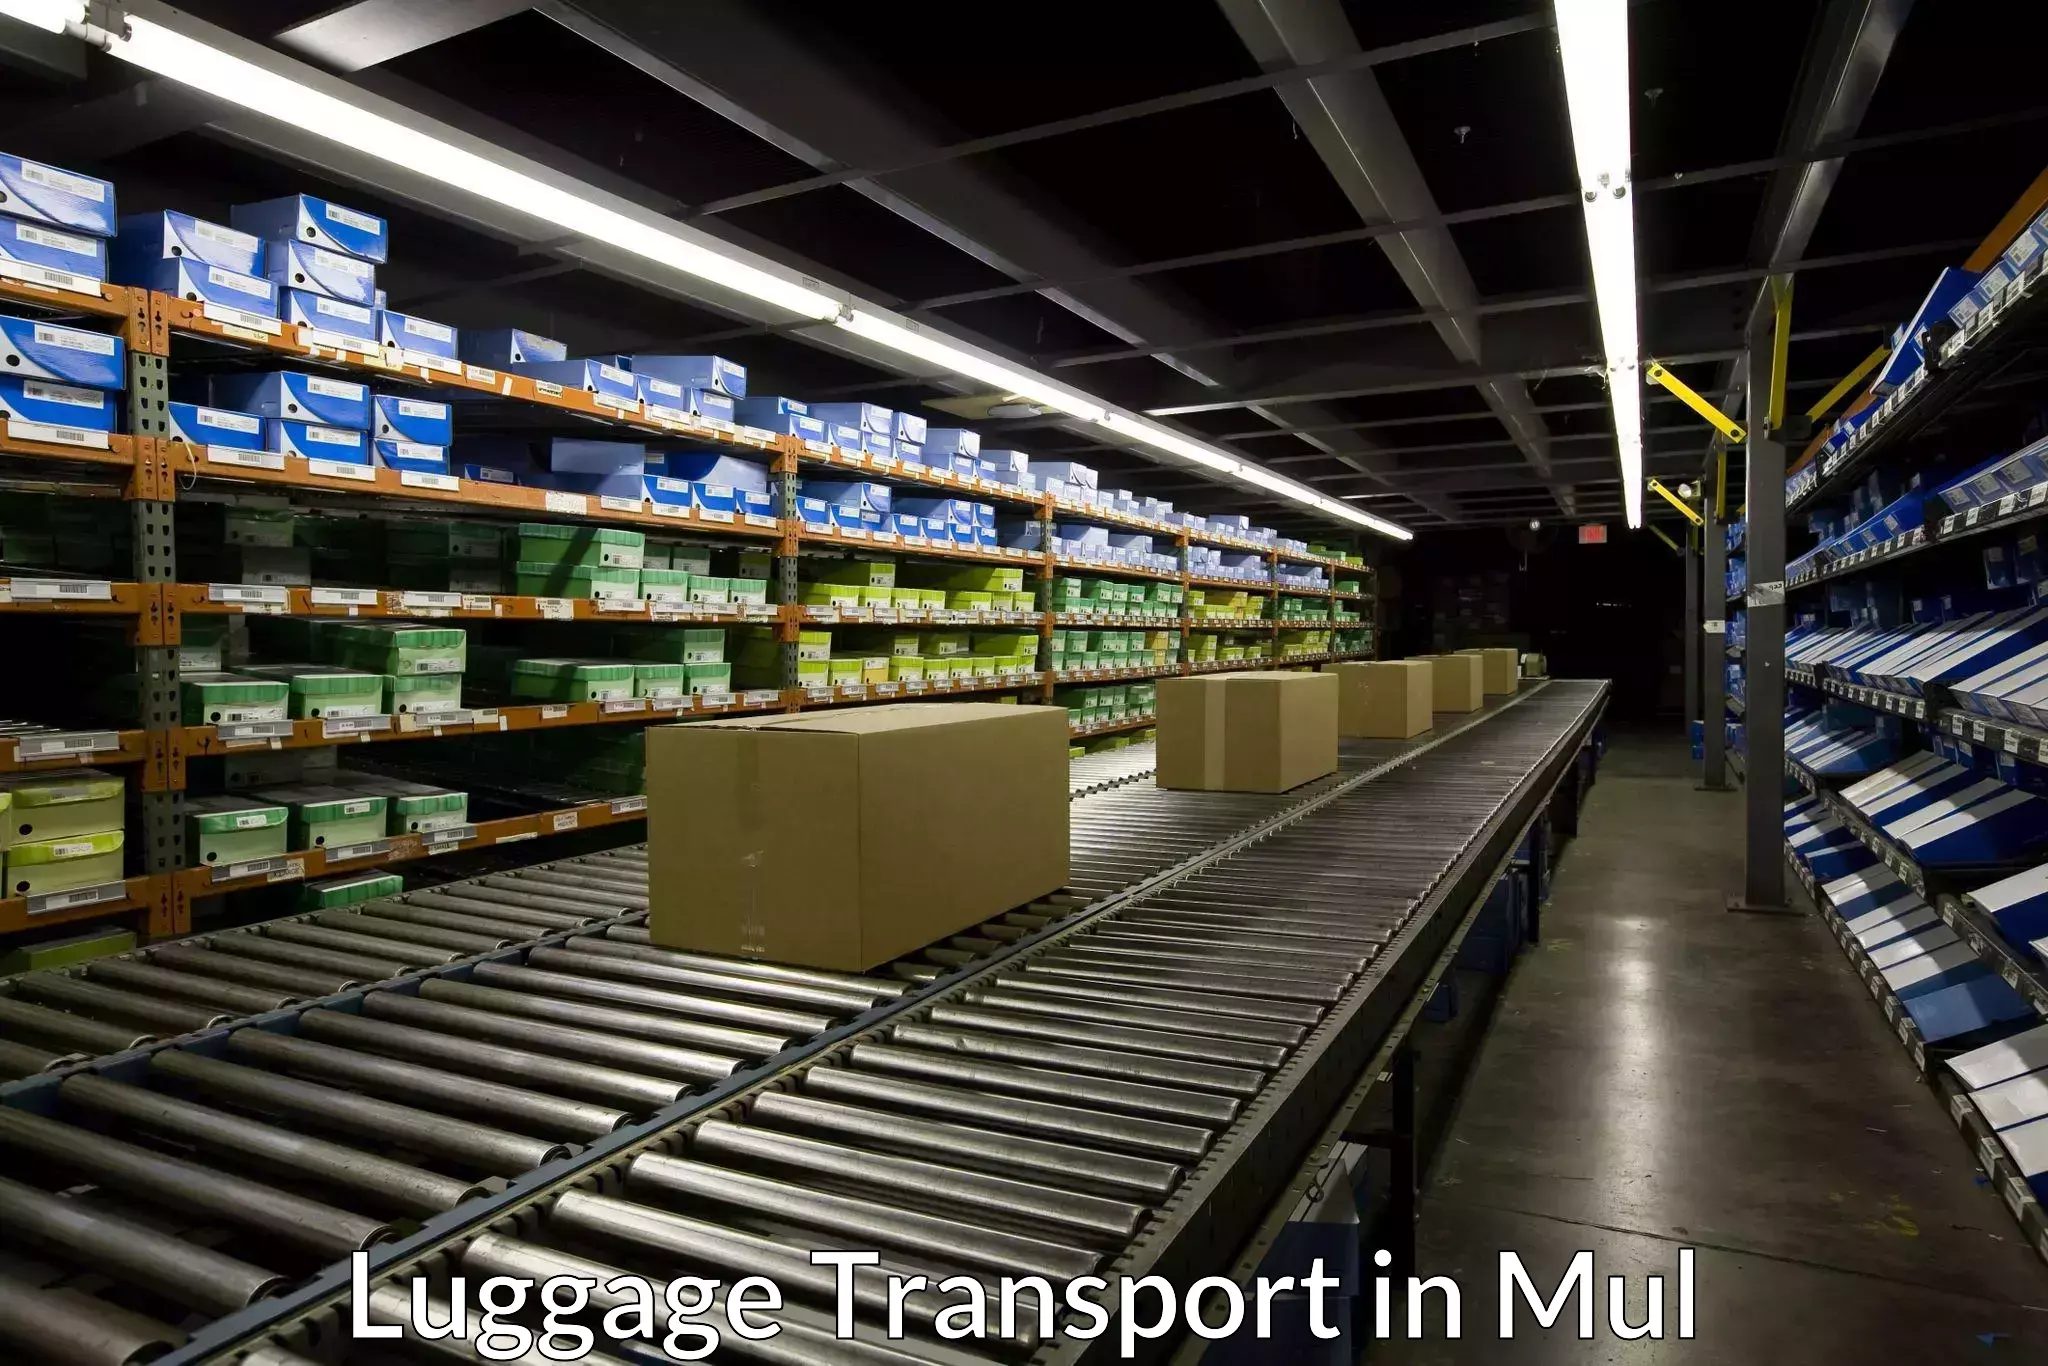 Luggage transport operations in Mul